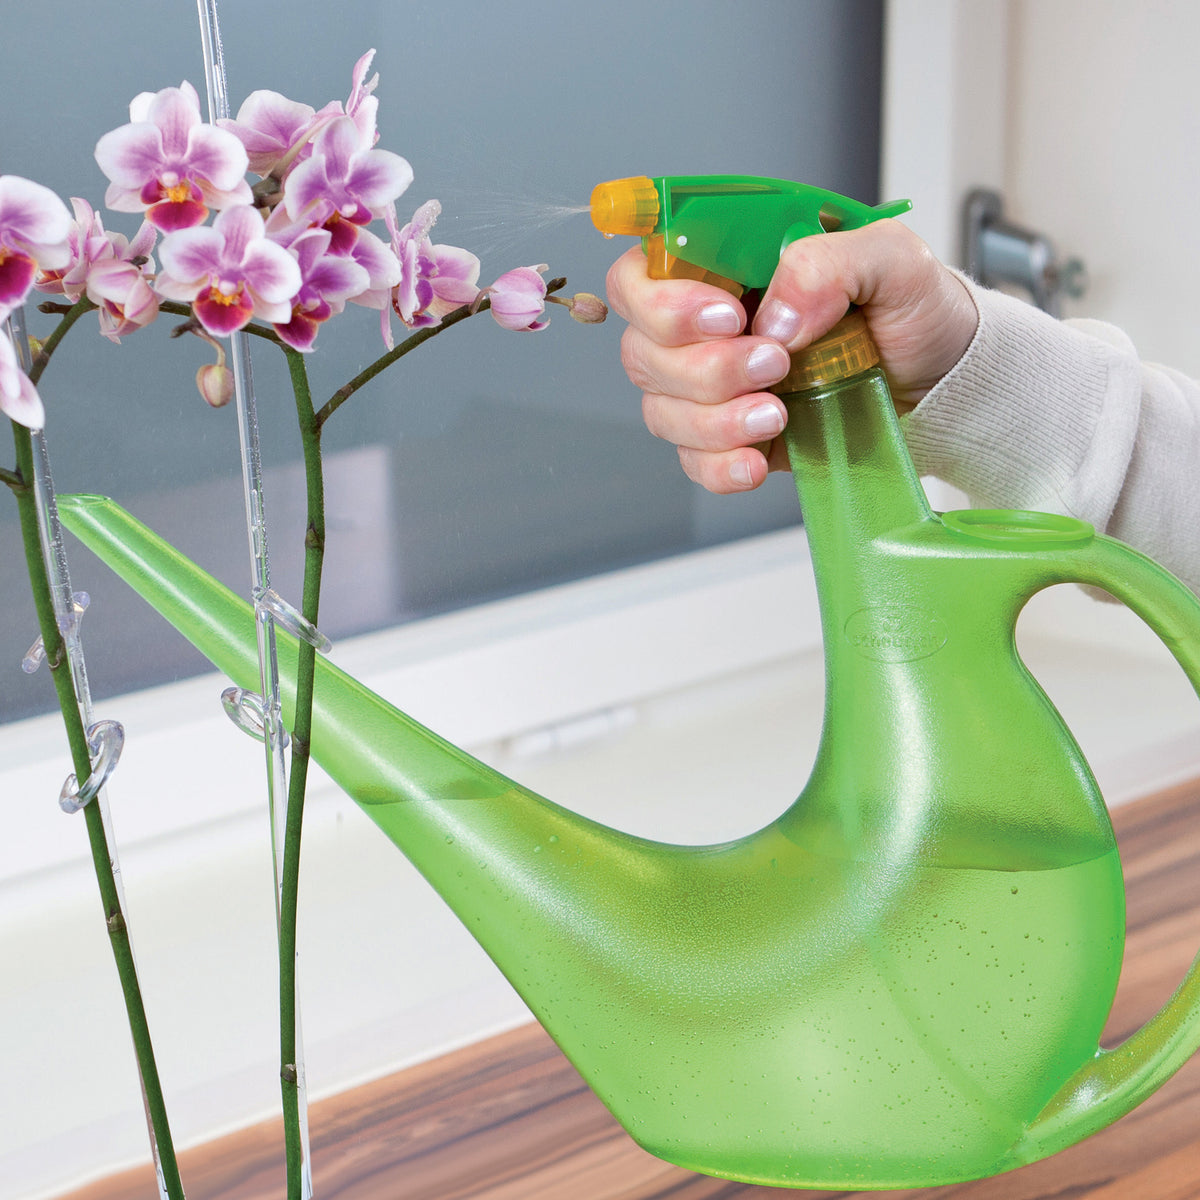 Buy sprayman watering can - Online store for lawn & plant care, hand sprayers in USA, on sale, low price, discount deals, coupon code